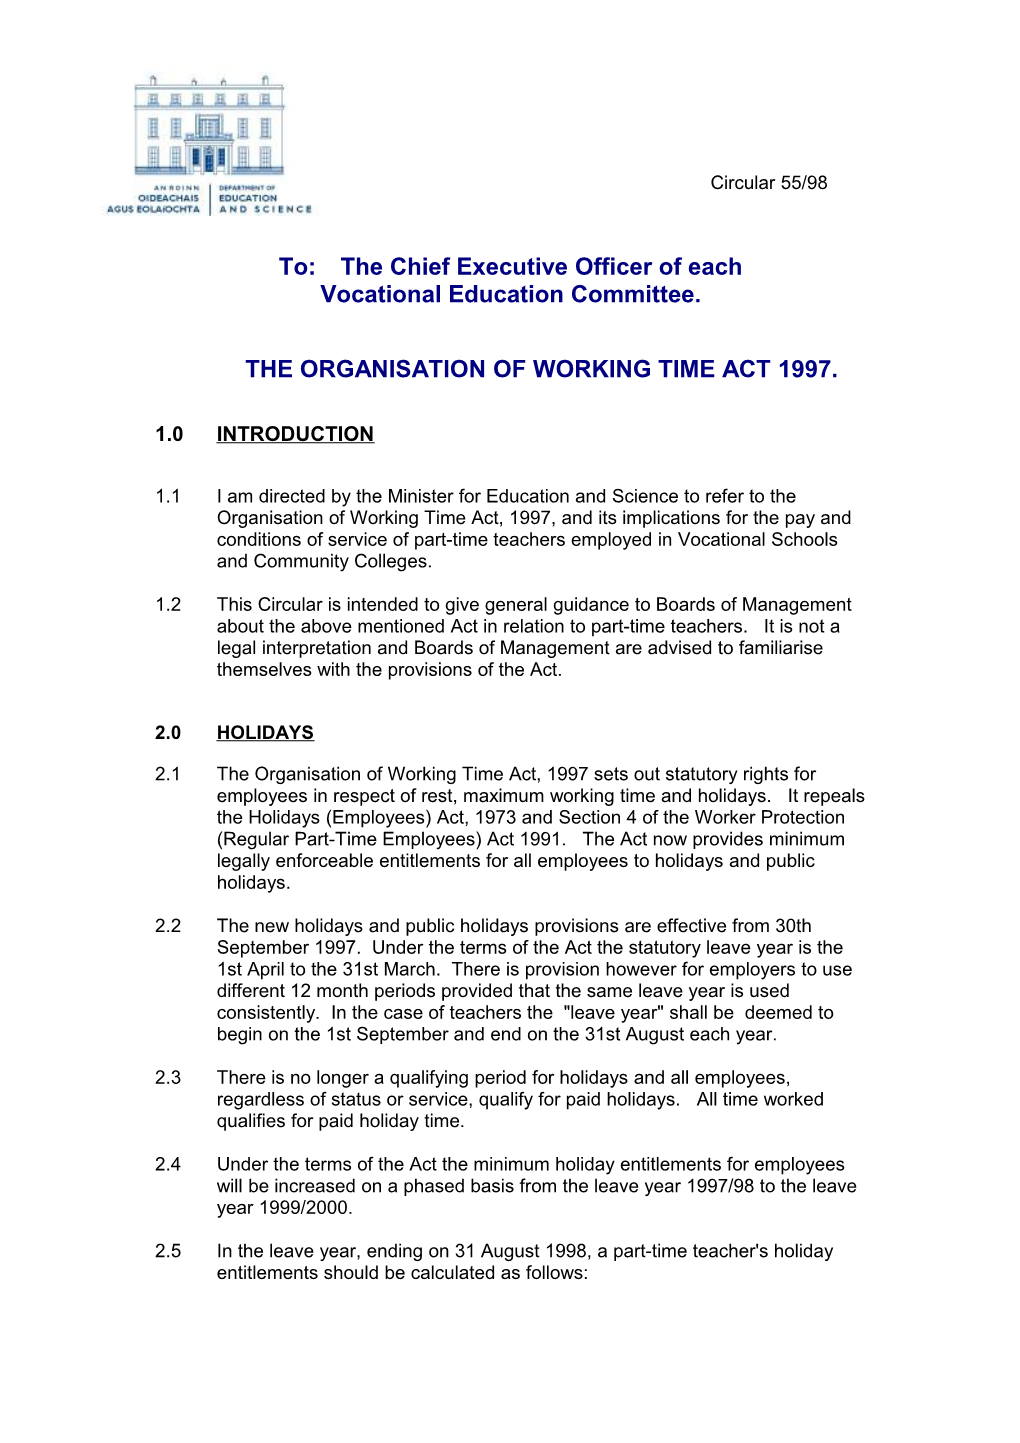 Circular 55/98 Organistion of Working Time Act, 1997 (Word Format 41KB)